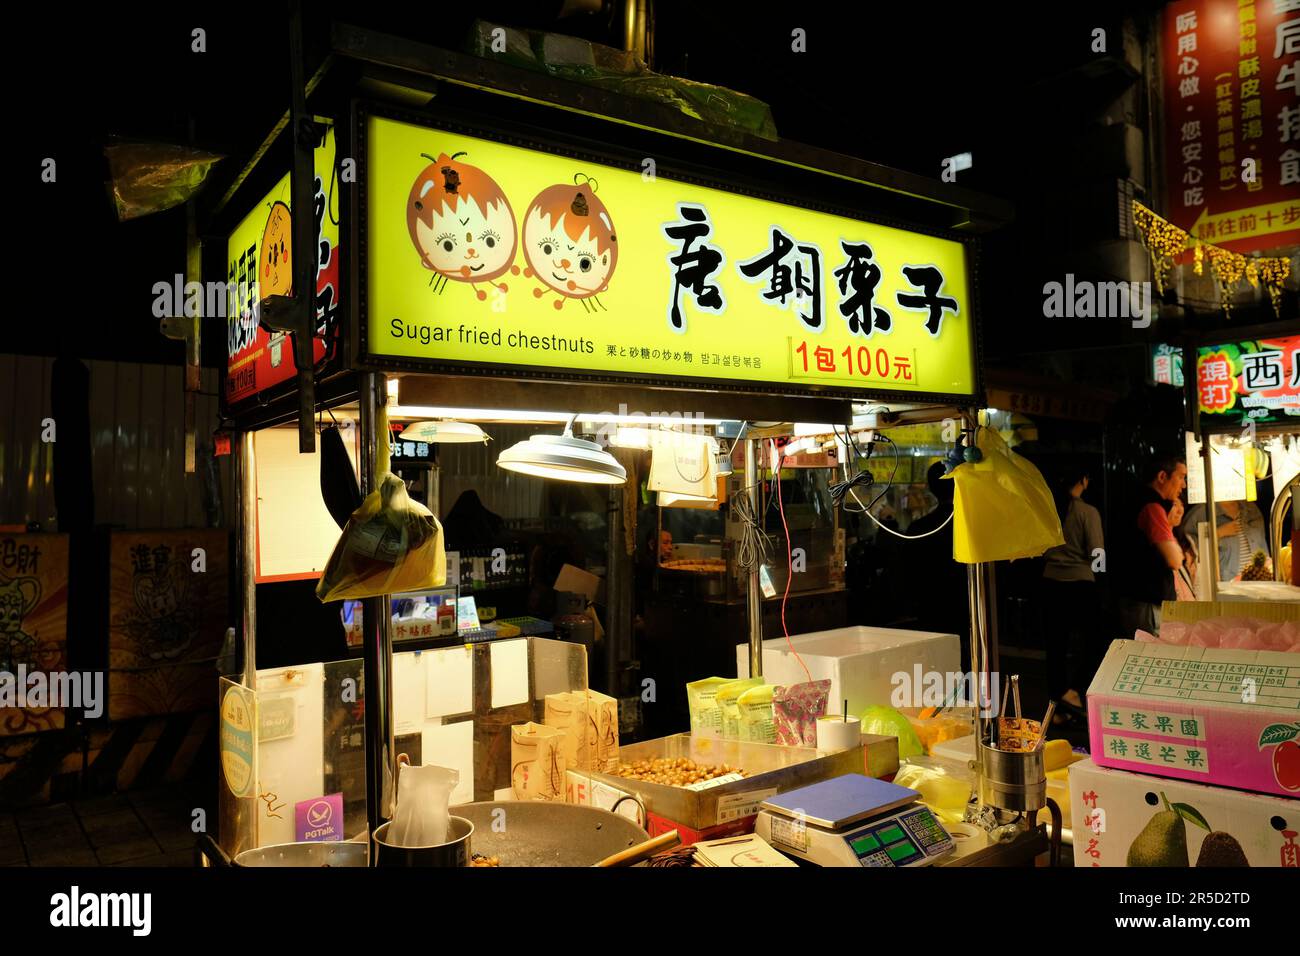 Sugar Fried Chestnuts stand at Huaxi Street Tourist Night Market in Taipei, Taiwan; street food cart in Taipei; traditional Taiwanese food. Stock Photo